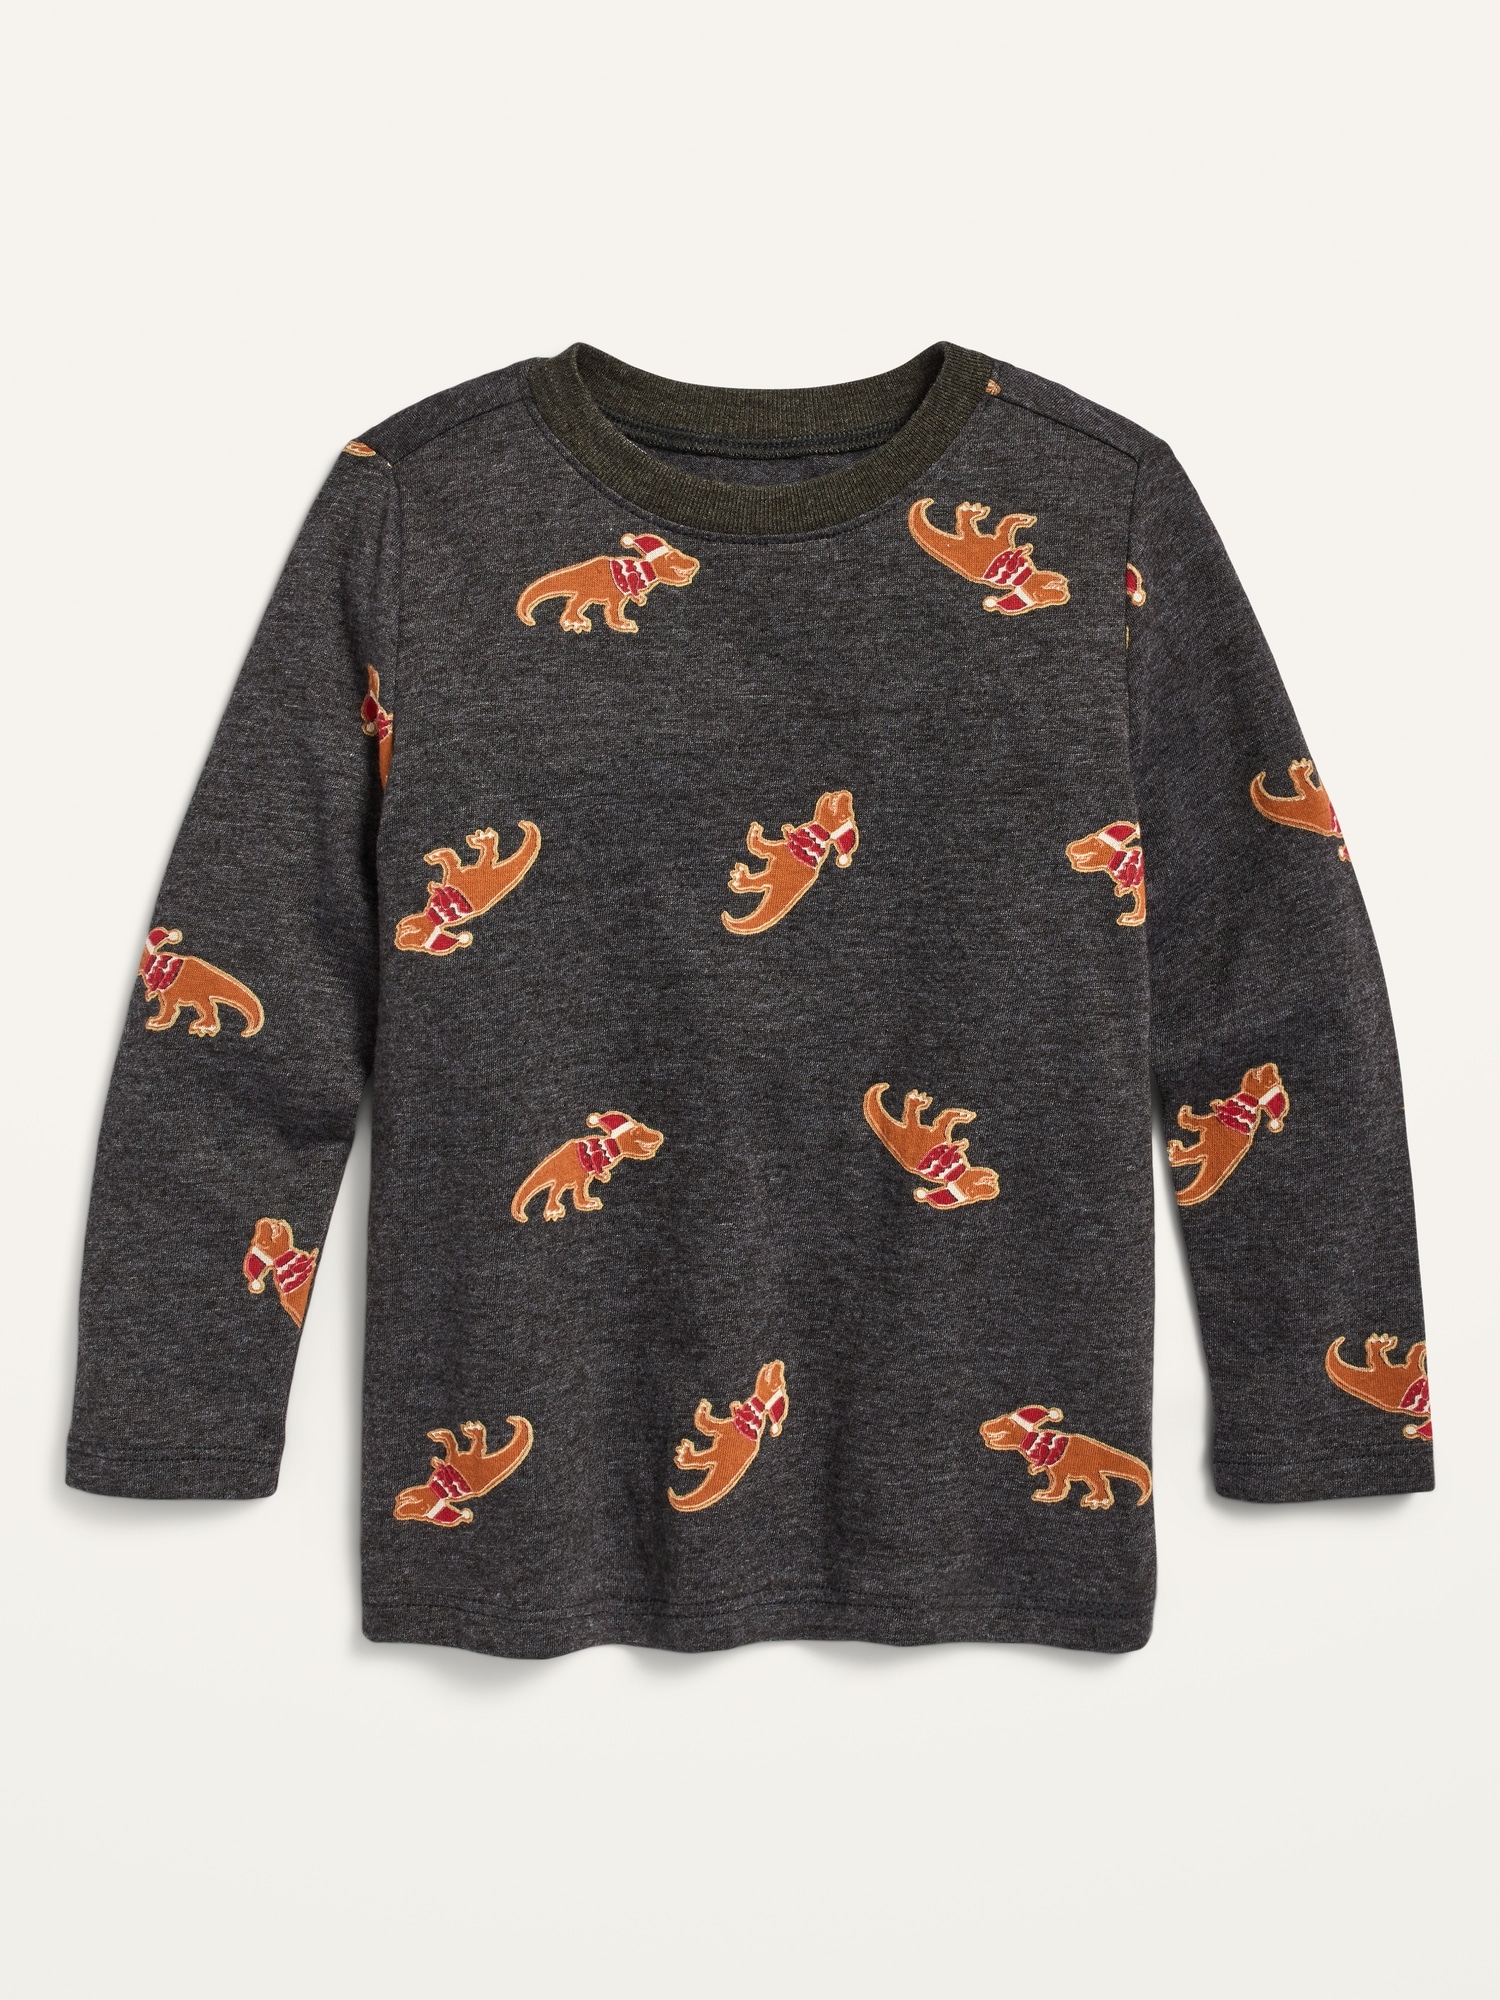 Long-Sleeve Printed Tee for Toddler Boys